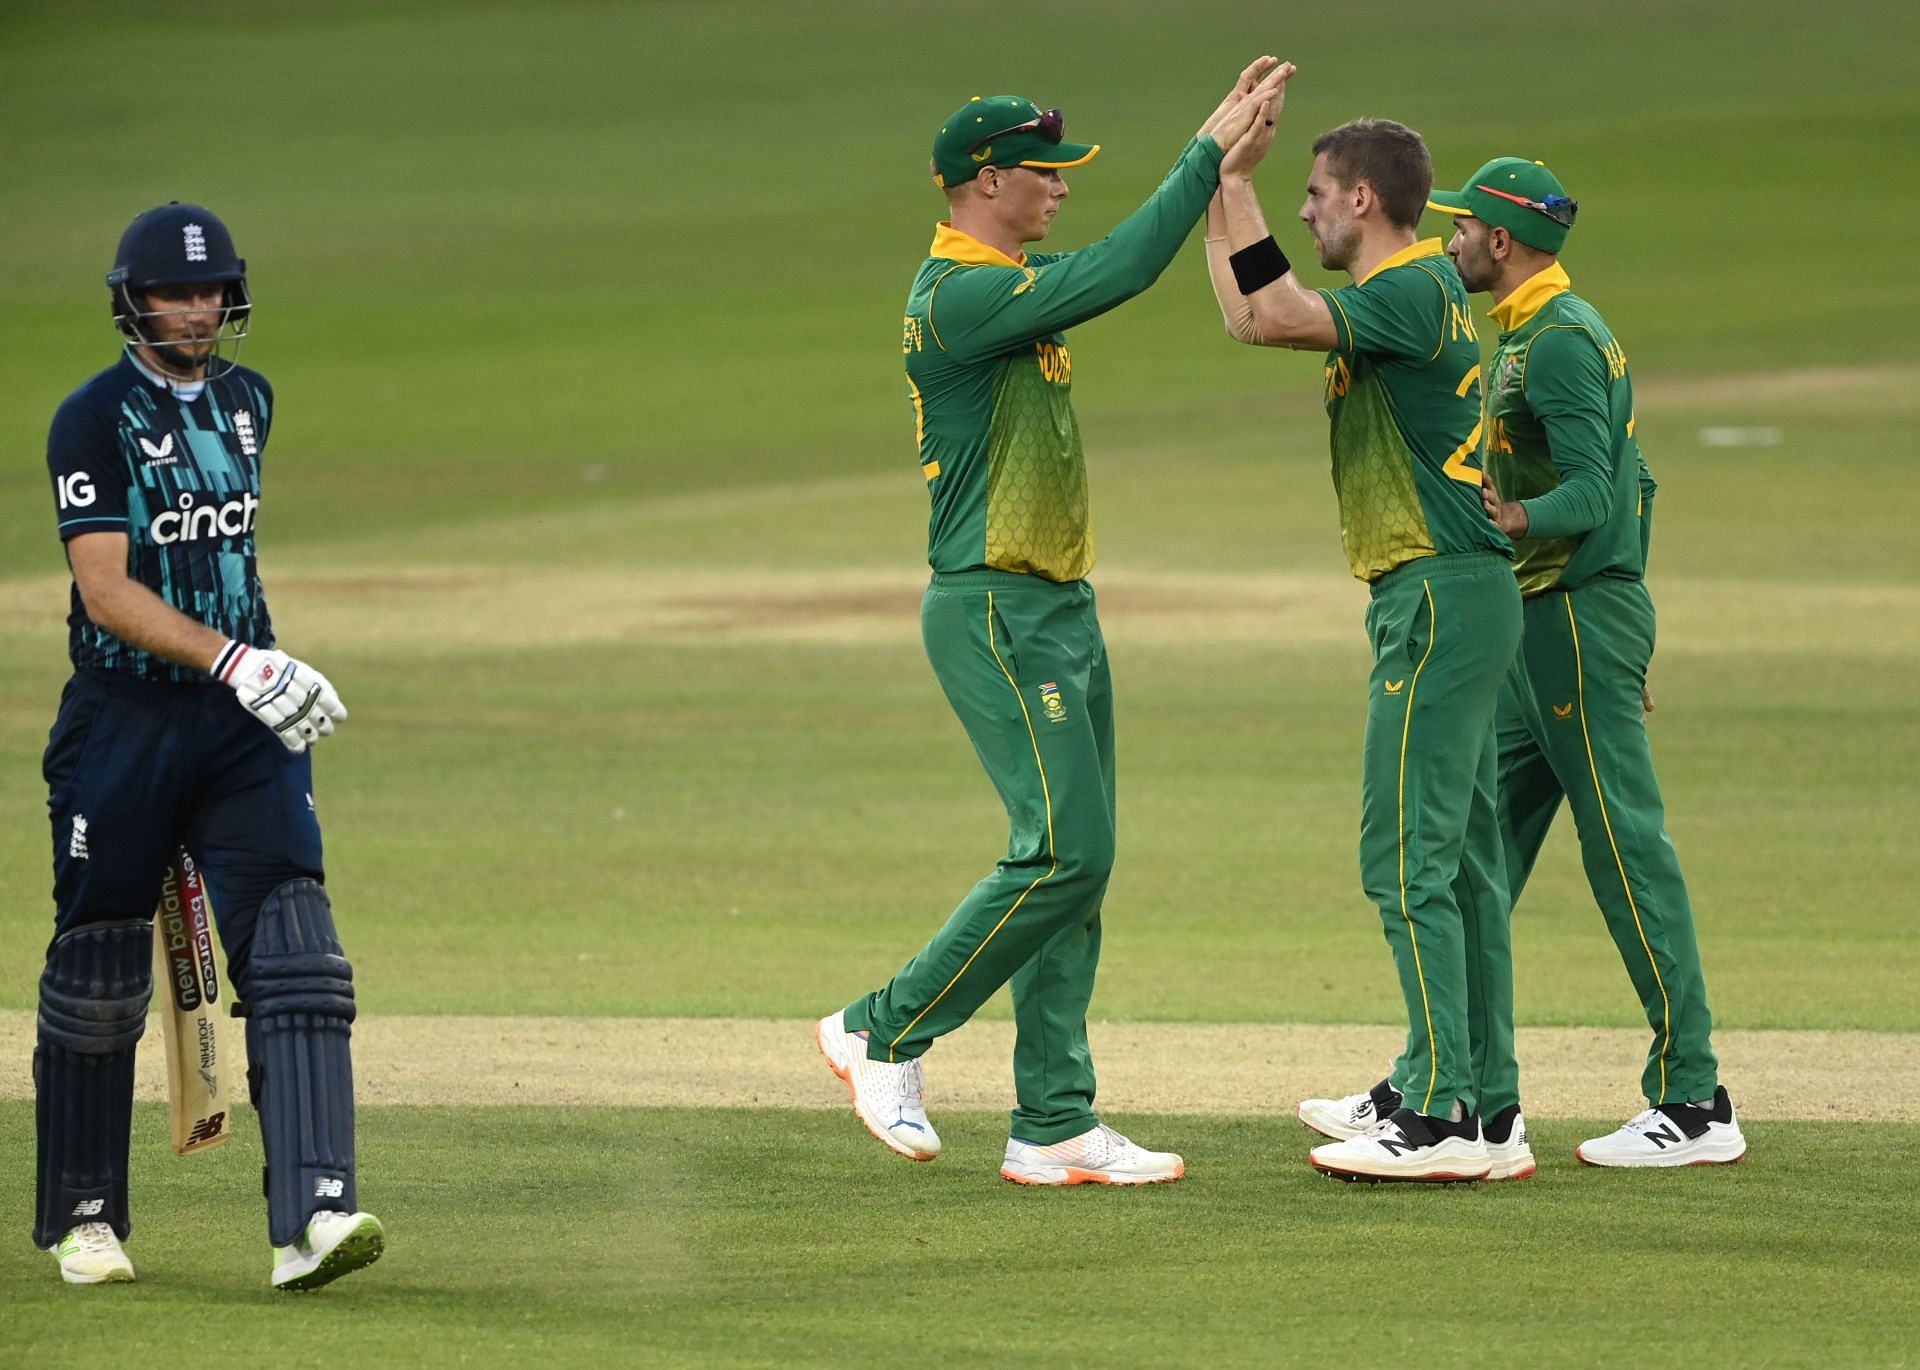 England v South Africa - First Royal London Series One Day International